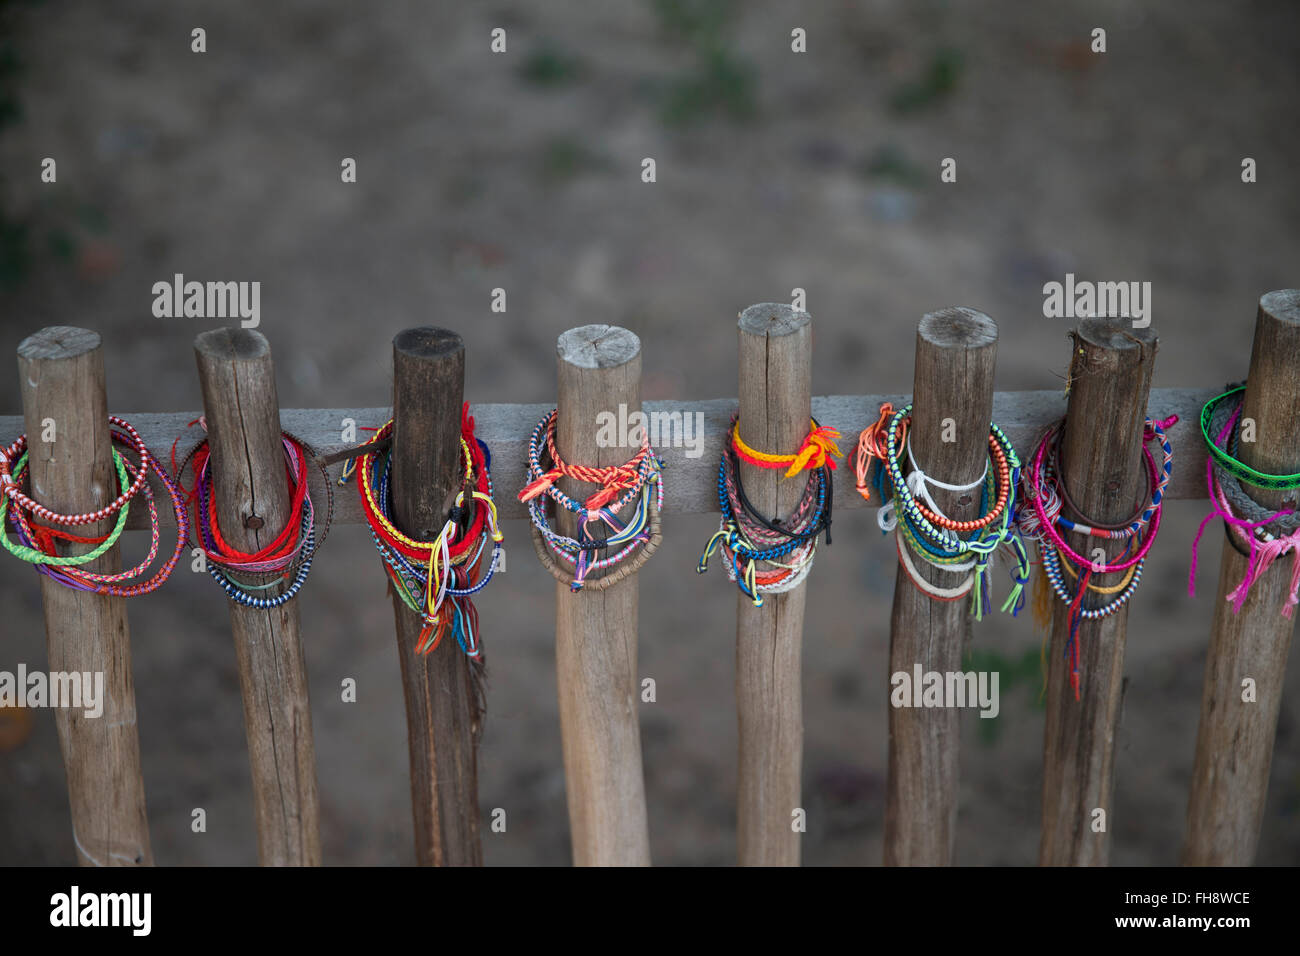 Beads commemorating victims of the Killing Fields in Phnom Penh, Cambodia Stock Photo